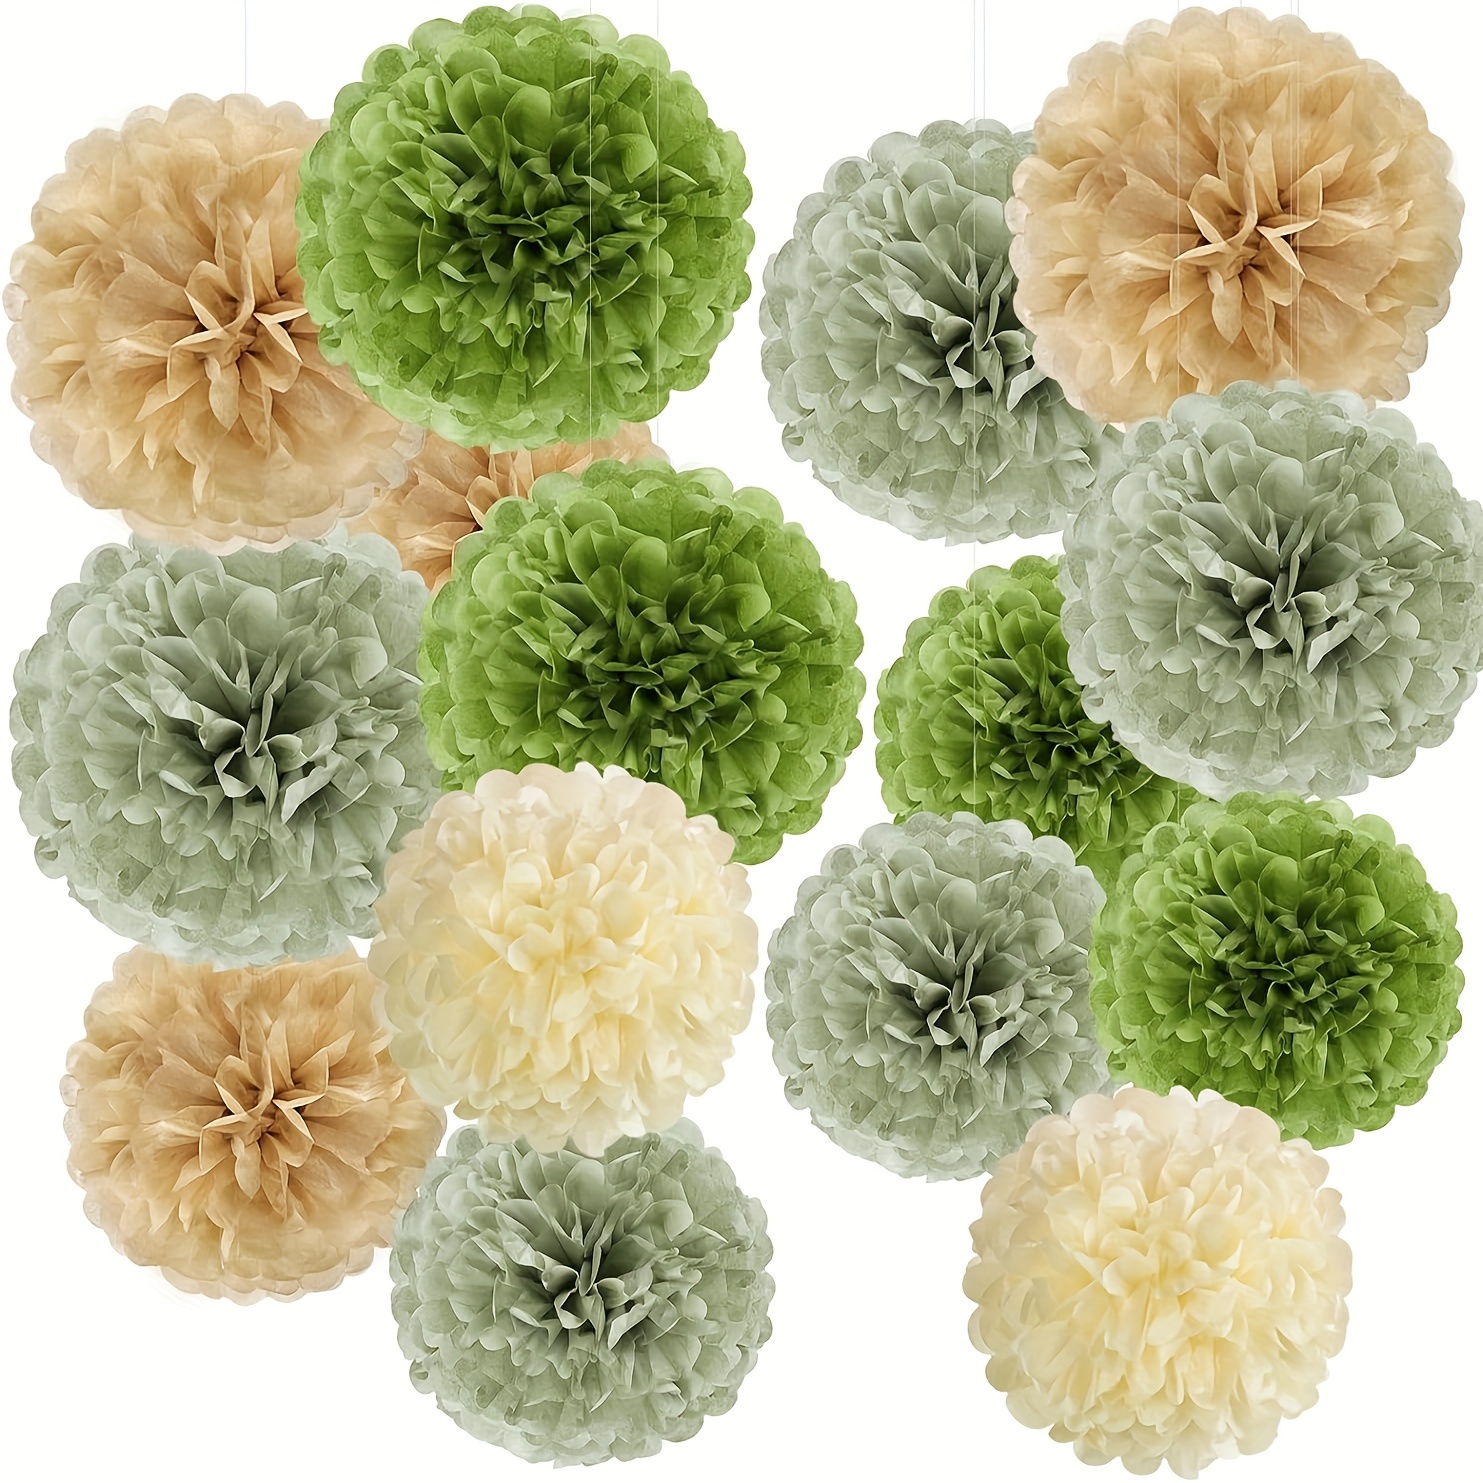 

15pcs, Olive Sage Green Tissue Paper Pom Poms Hot Pink Tissue Pom Poms Paper Flowers Decorations Natural Green Hanging Decor For Birthday Baby Shower Bridal Wedding Party Supplies